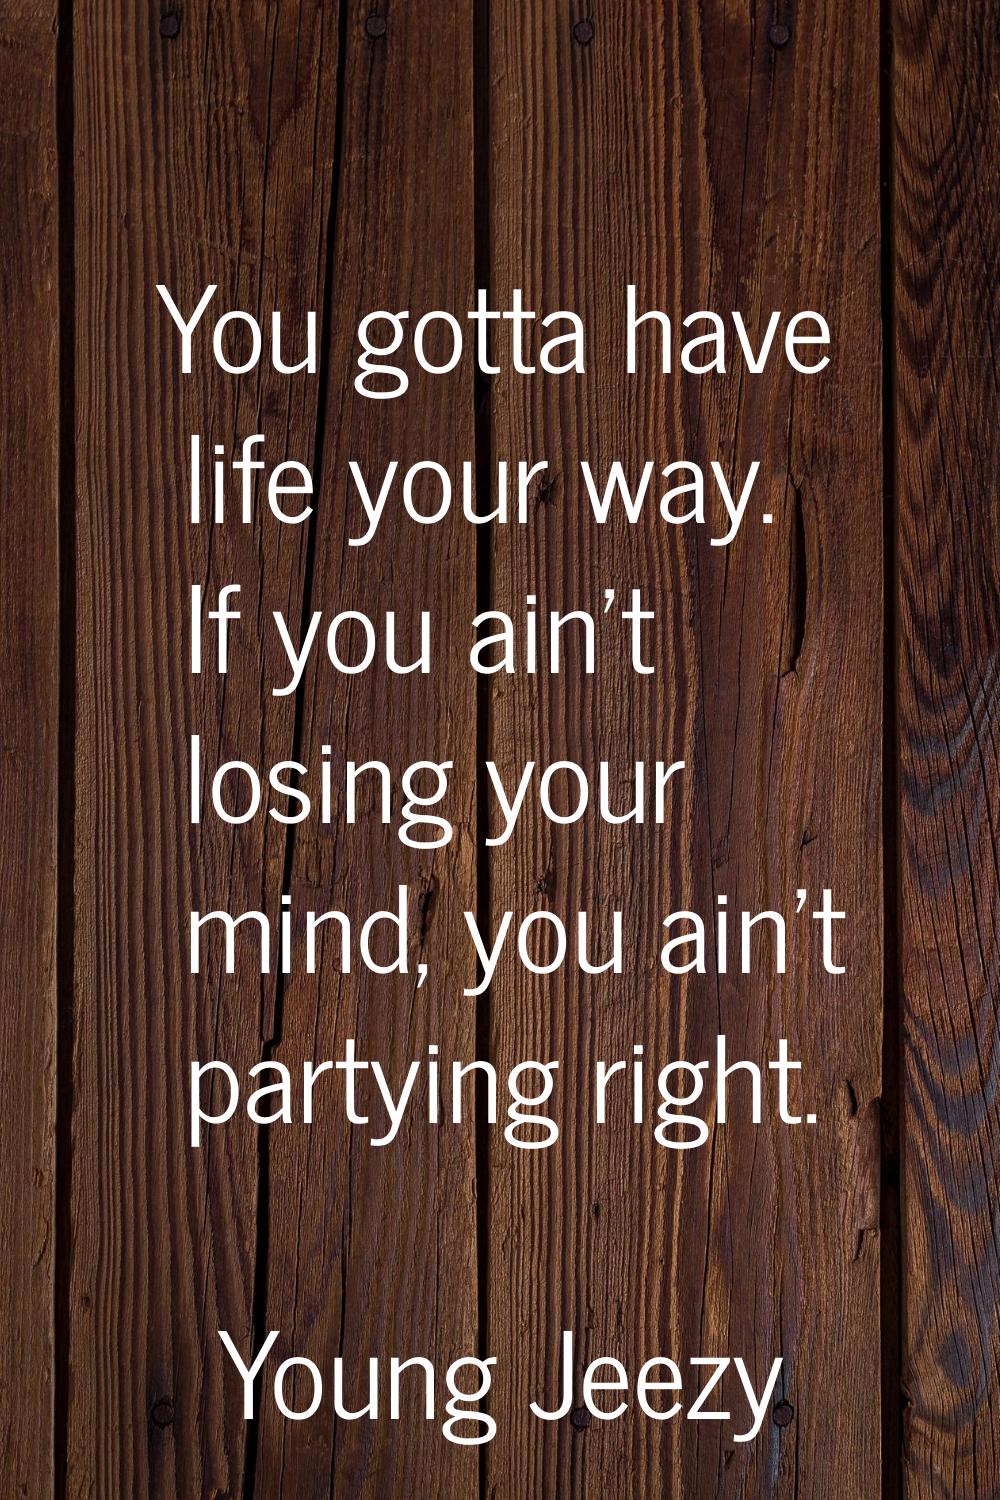 You gotta have life your way. If you ain't losing your mind, you ain't partying right.